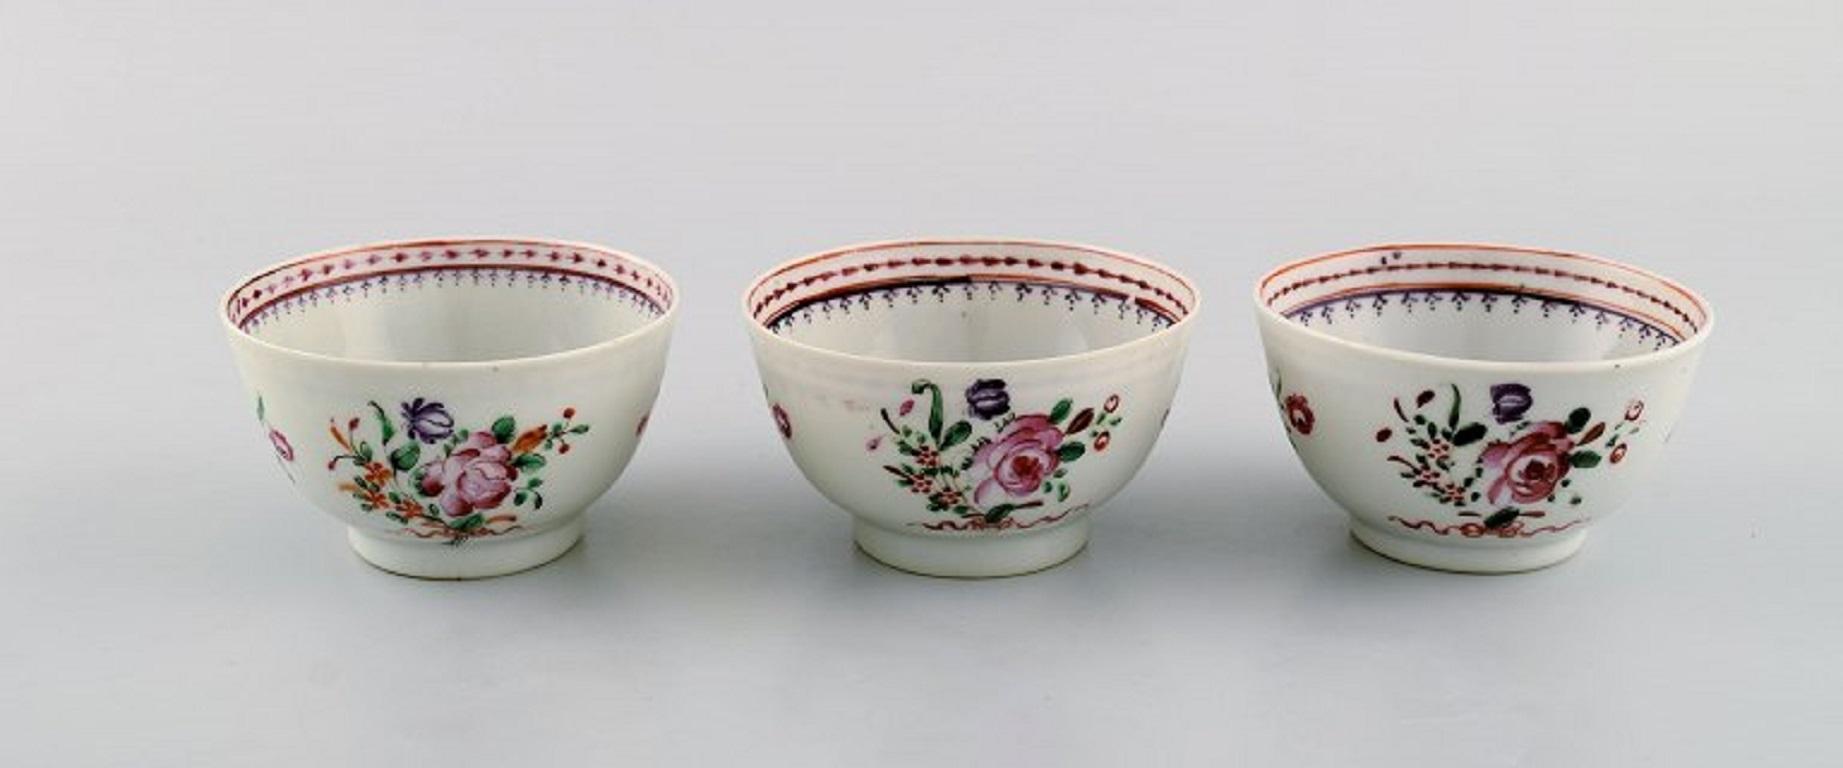 Three antique Chinese teacups in hand-painted porcelain. Qian Long (1736-1795).
Measures: 8.5 x 4.8 cm.
In excellent condition.
Signed.